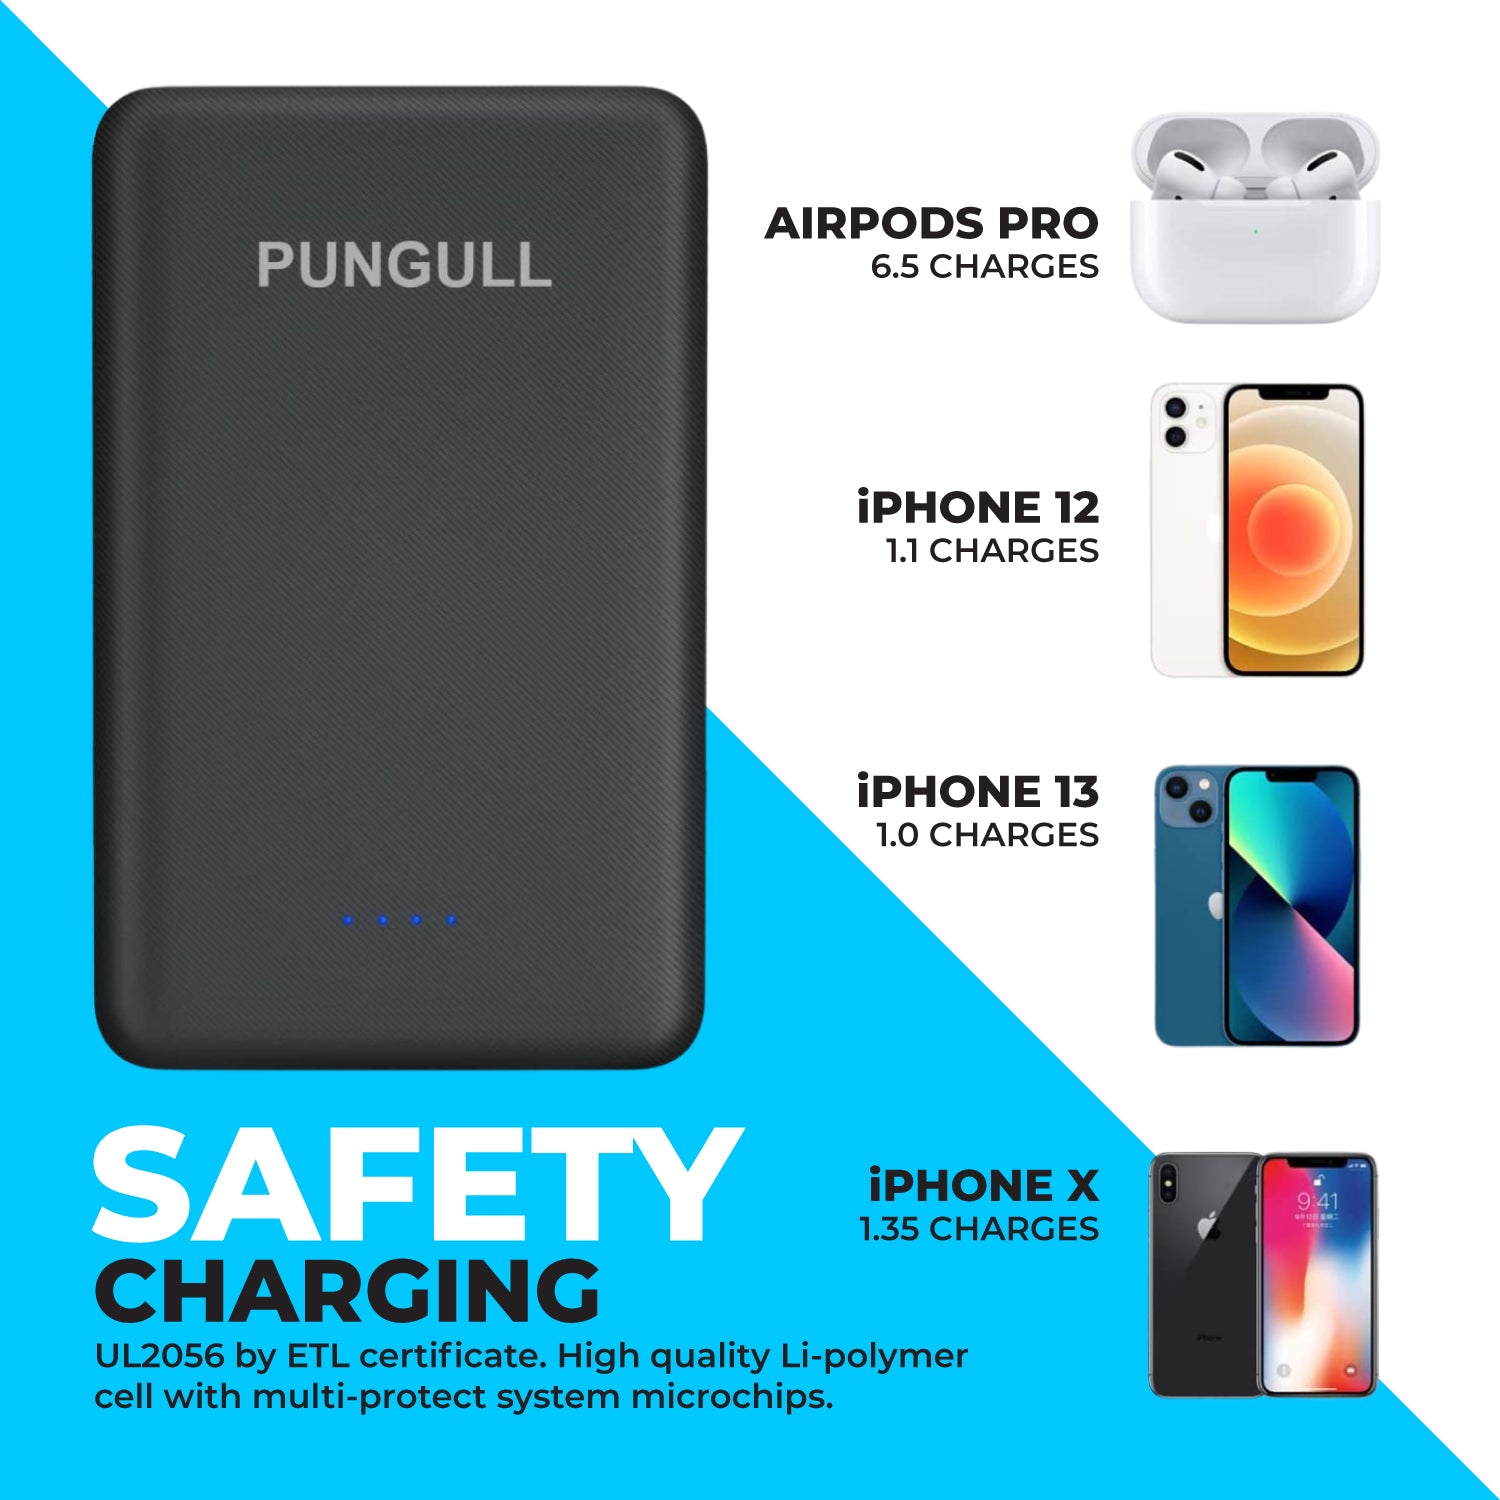 Small Power5000mah Mini Power Bank With Built-in Cables For Iphone,  Samsung & More